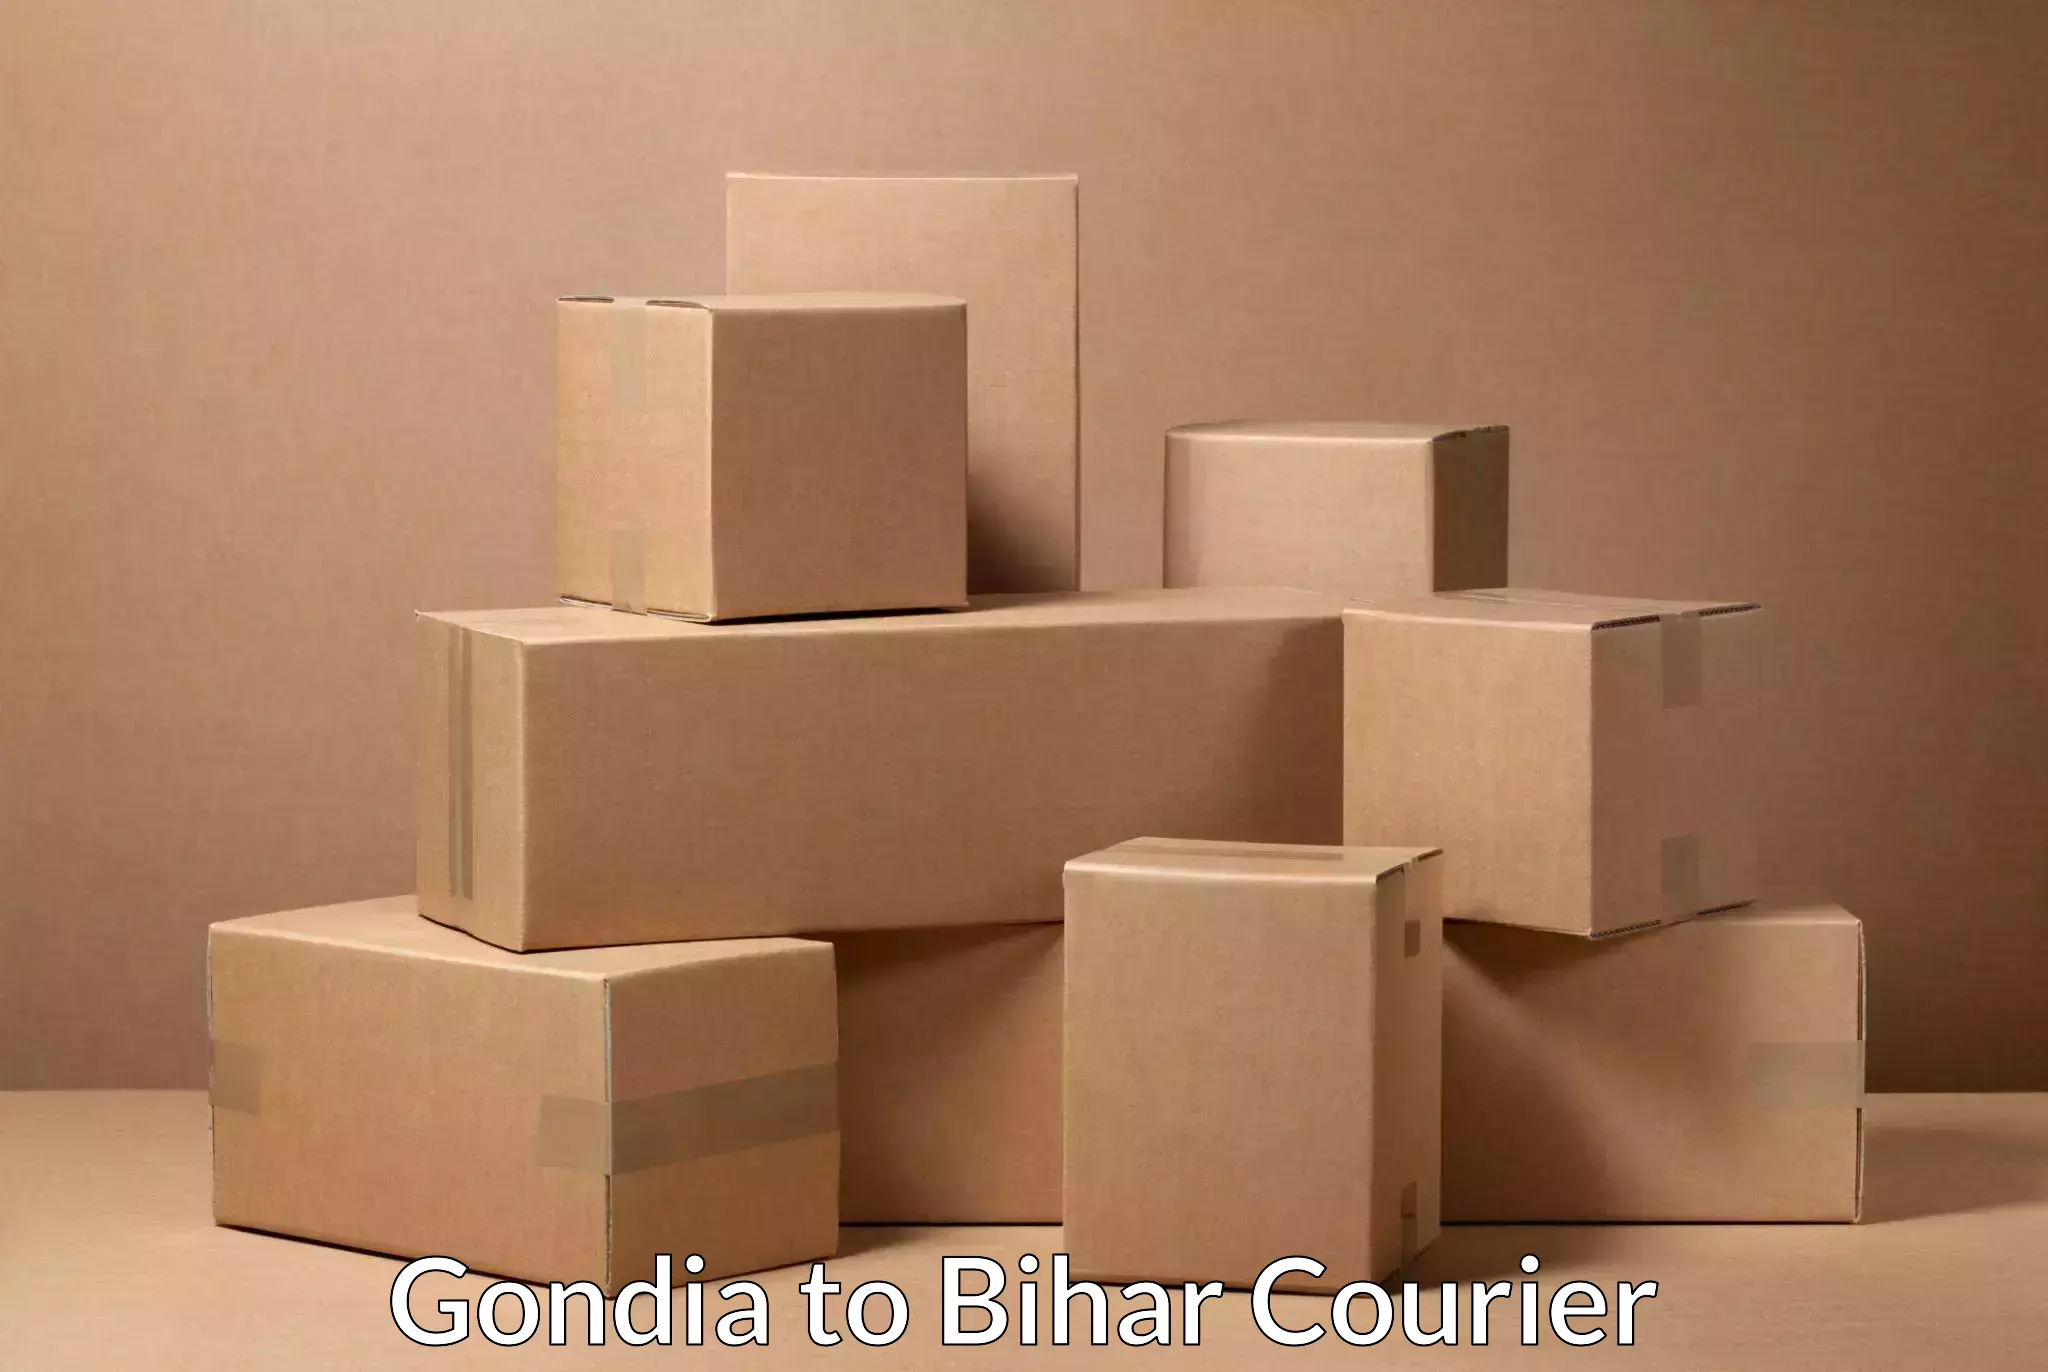 Courier service partnerships Gondia to Hasanpura